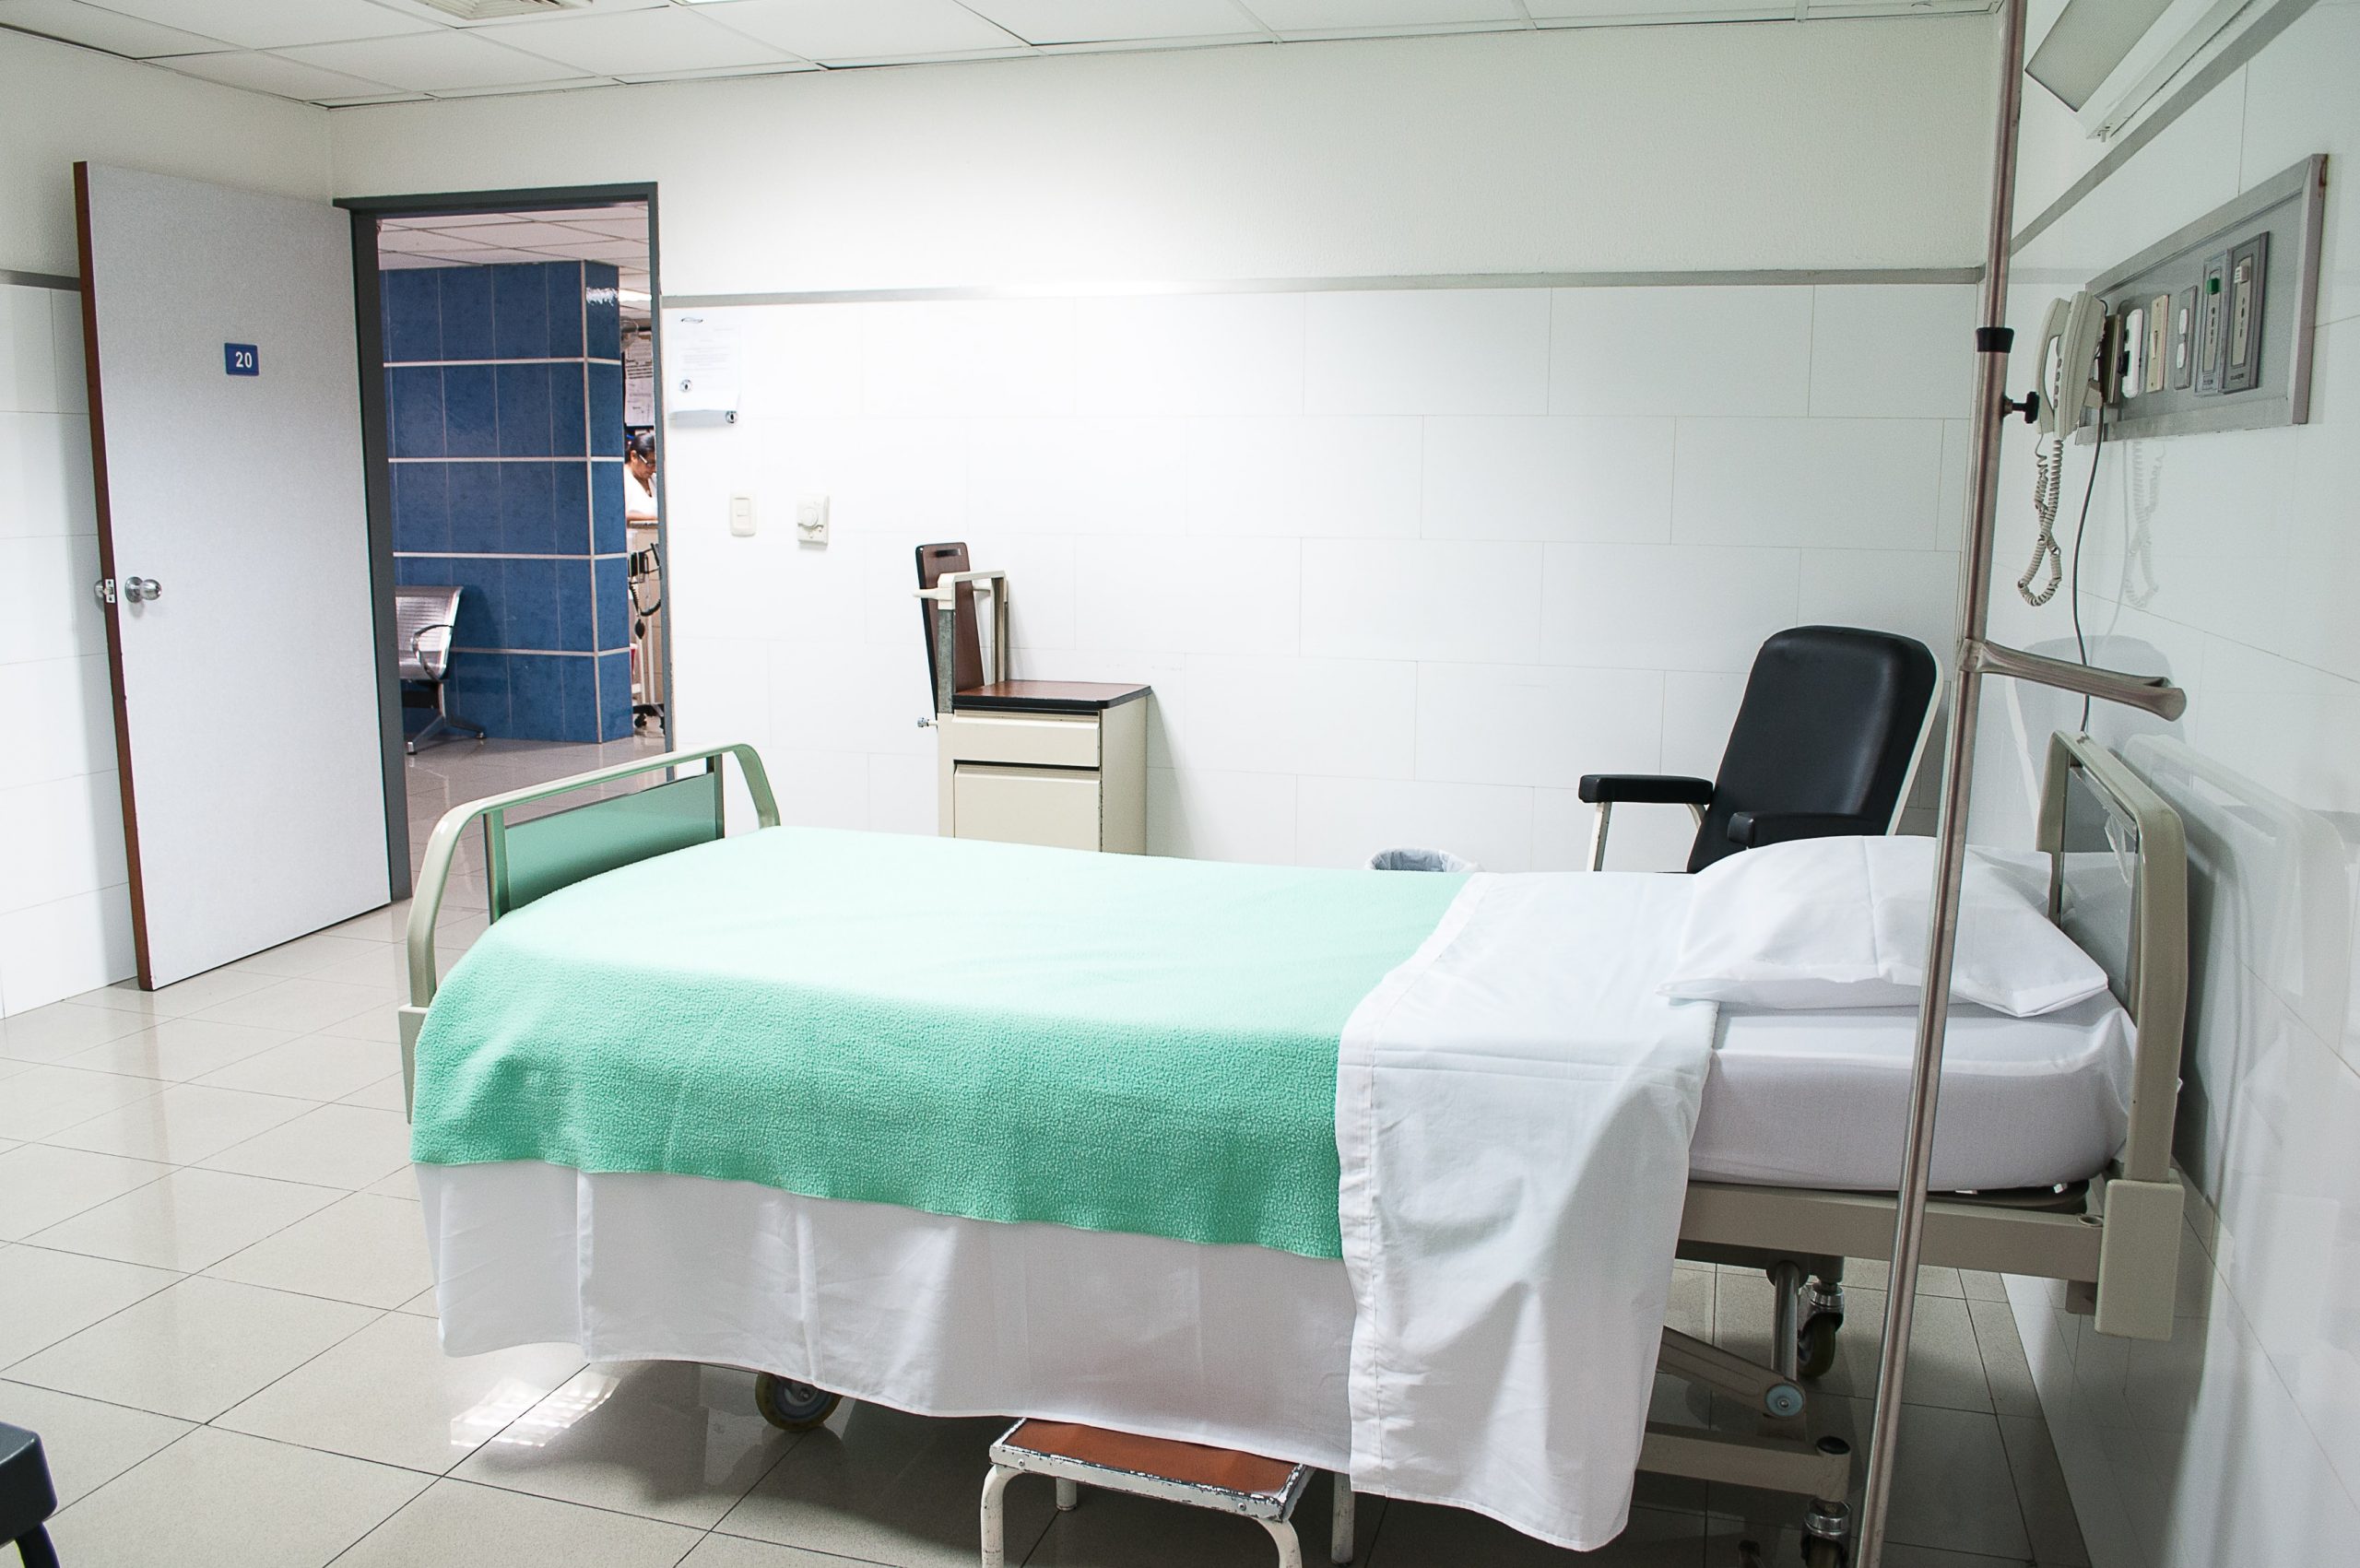 A medical bed in a healthcare center